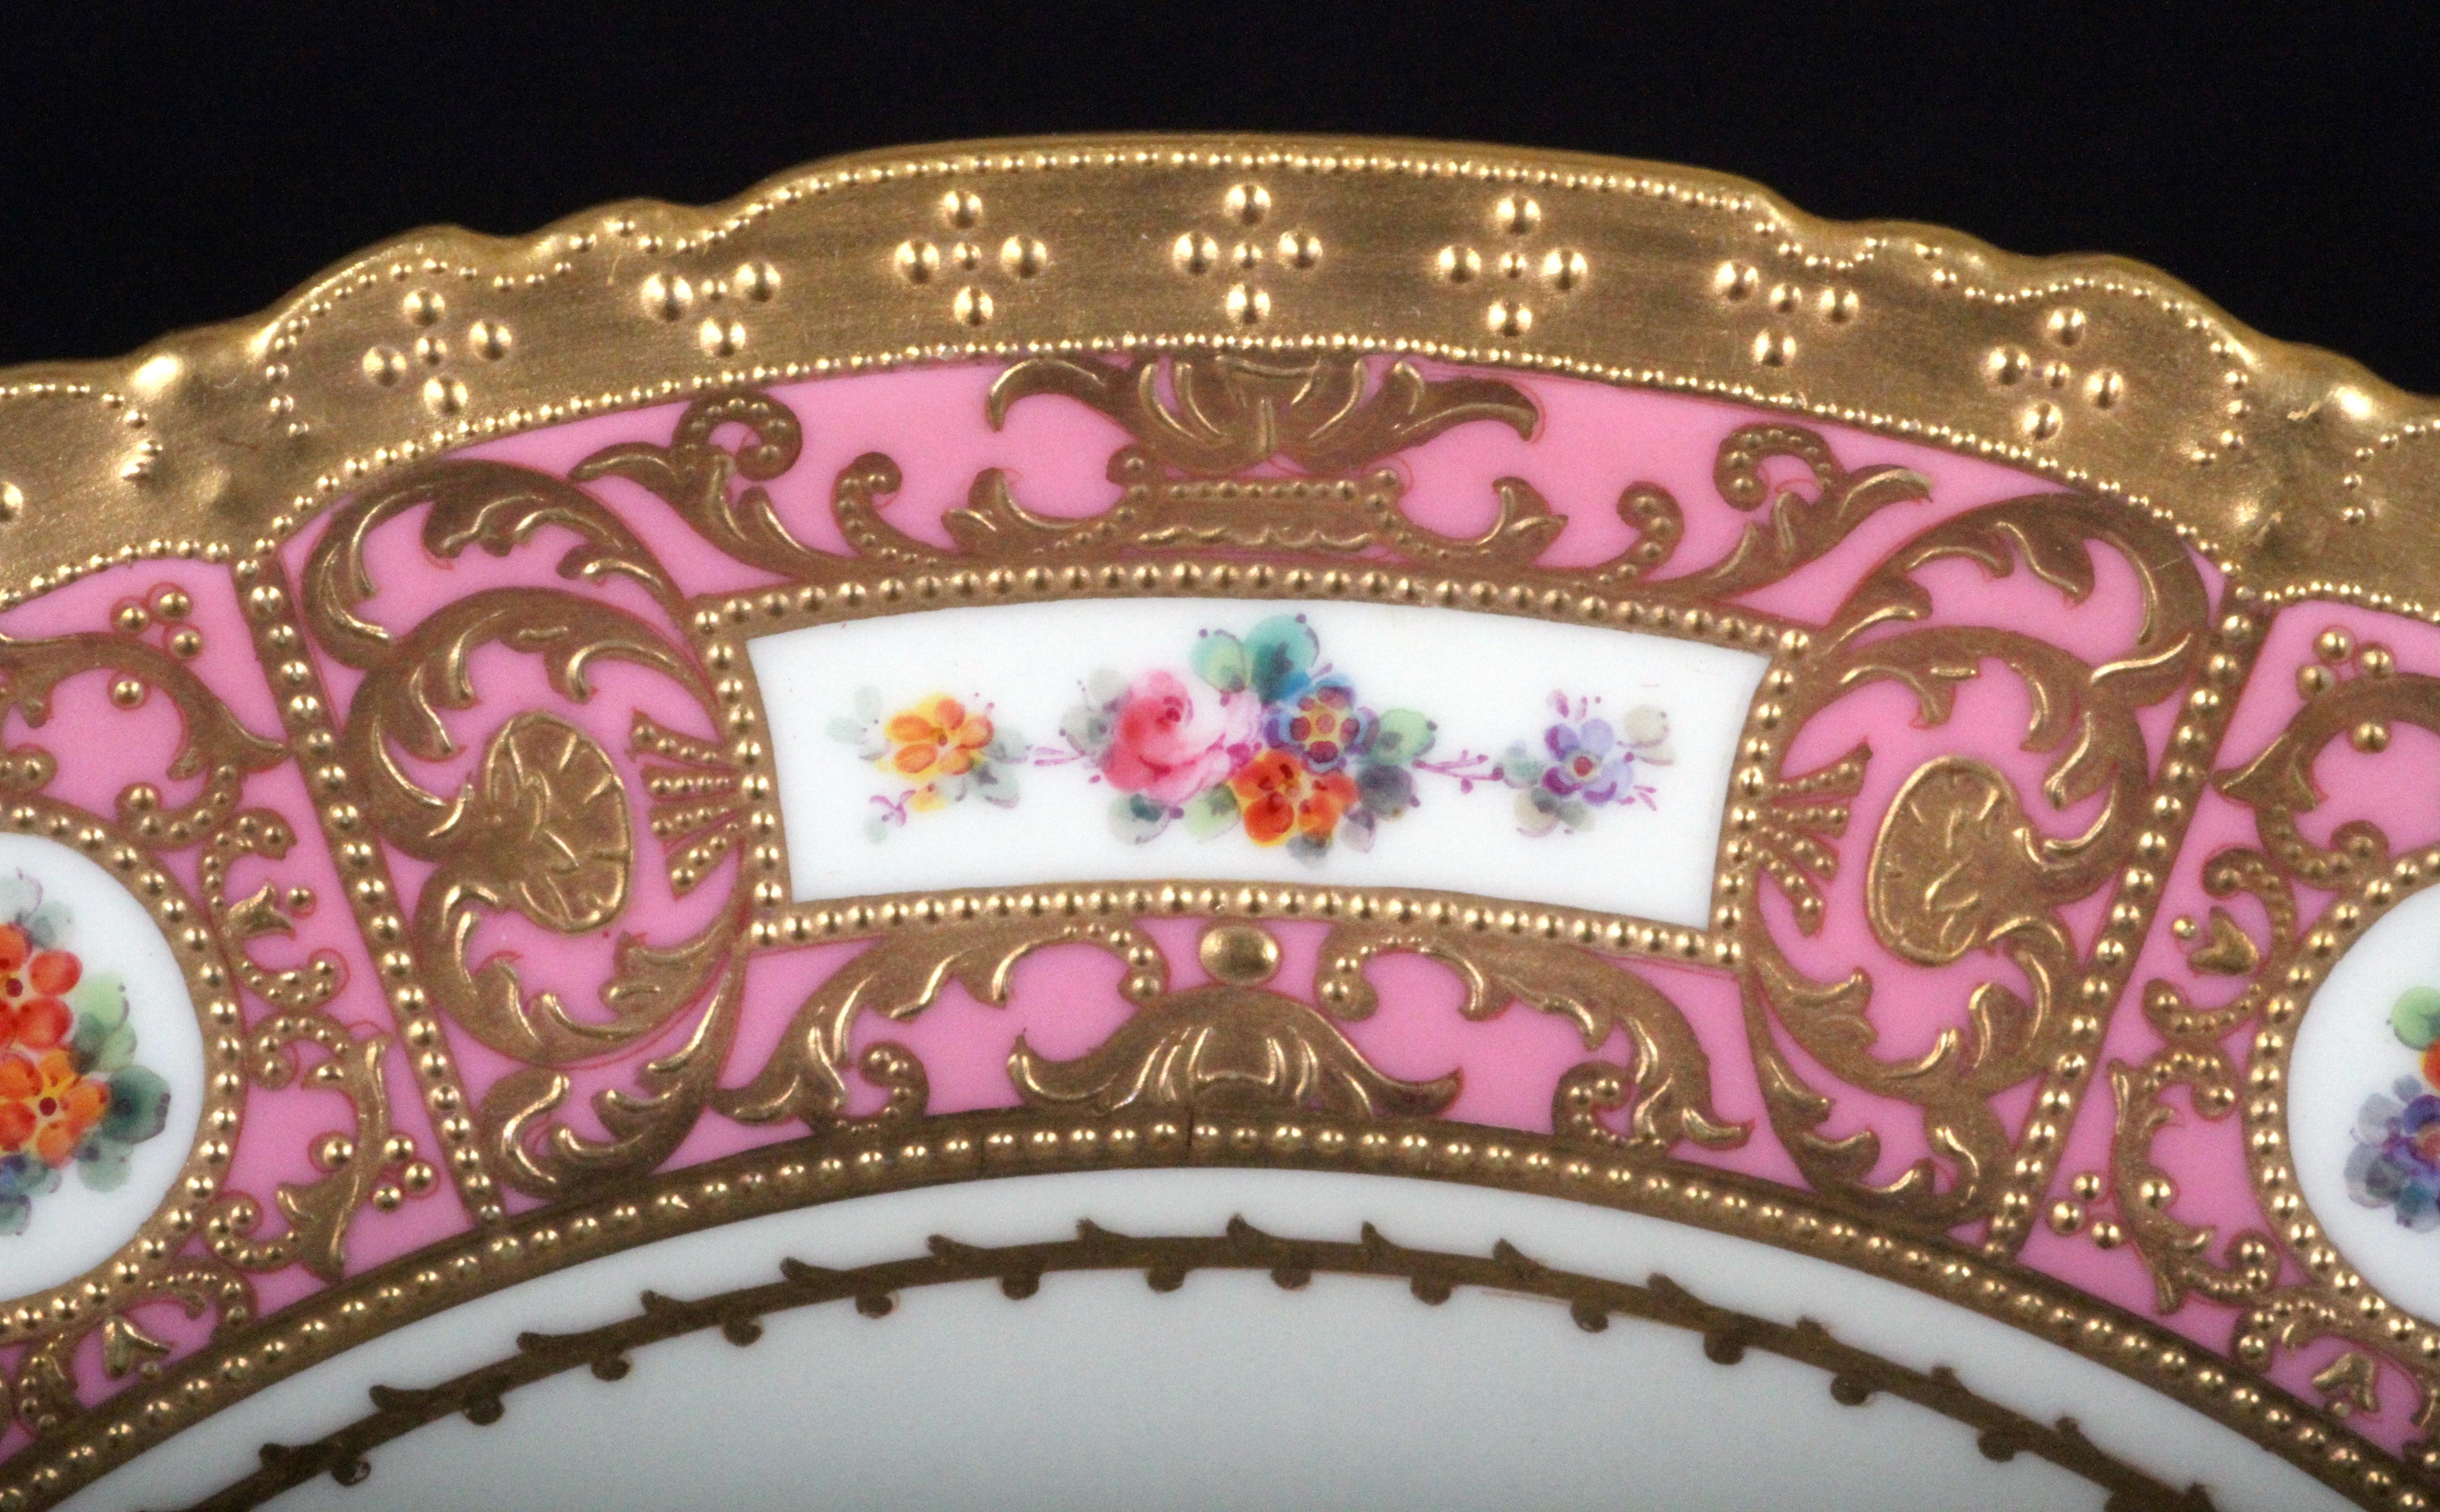 15 Derby for Tiffany Hand Painted and Gilded Pink Service Plates In Excellent Condition For Sale In New York, NY